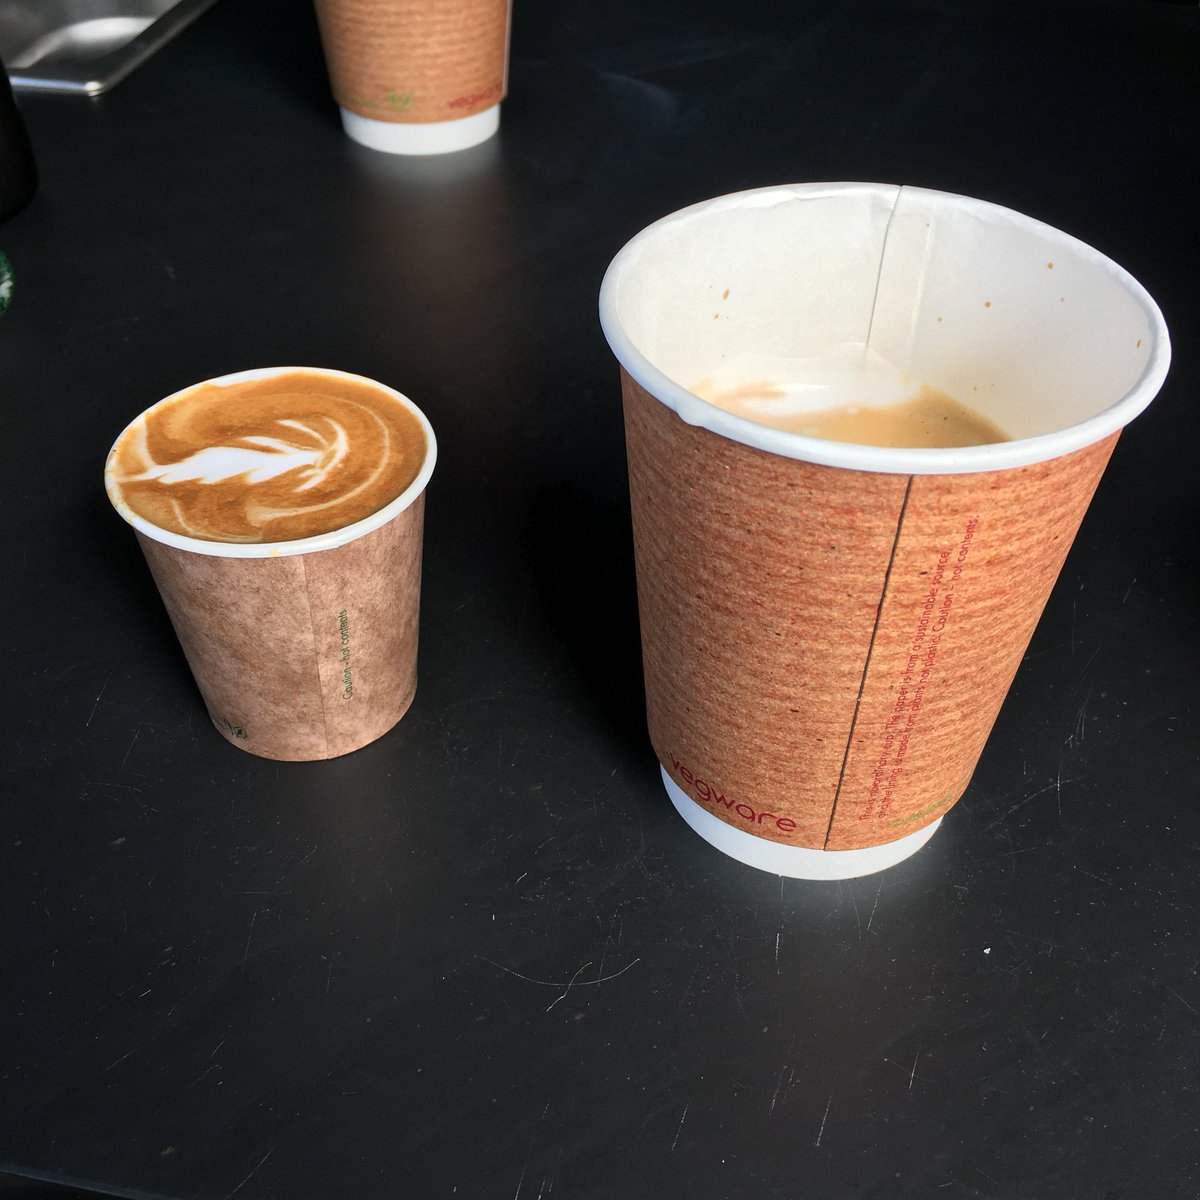 Amazing how coffee cup technology has developed. My current coffee cup (left) and an original 80s coffee cup, the size of a brick!